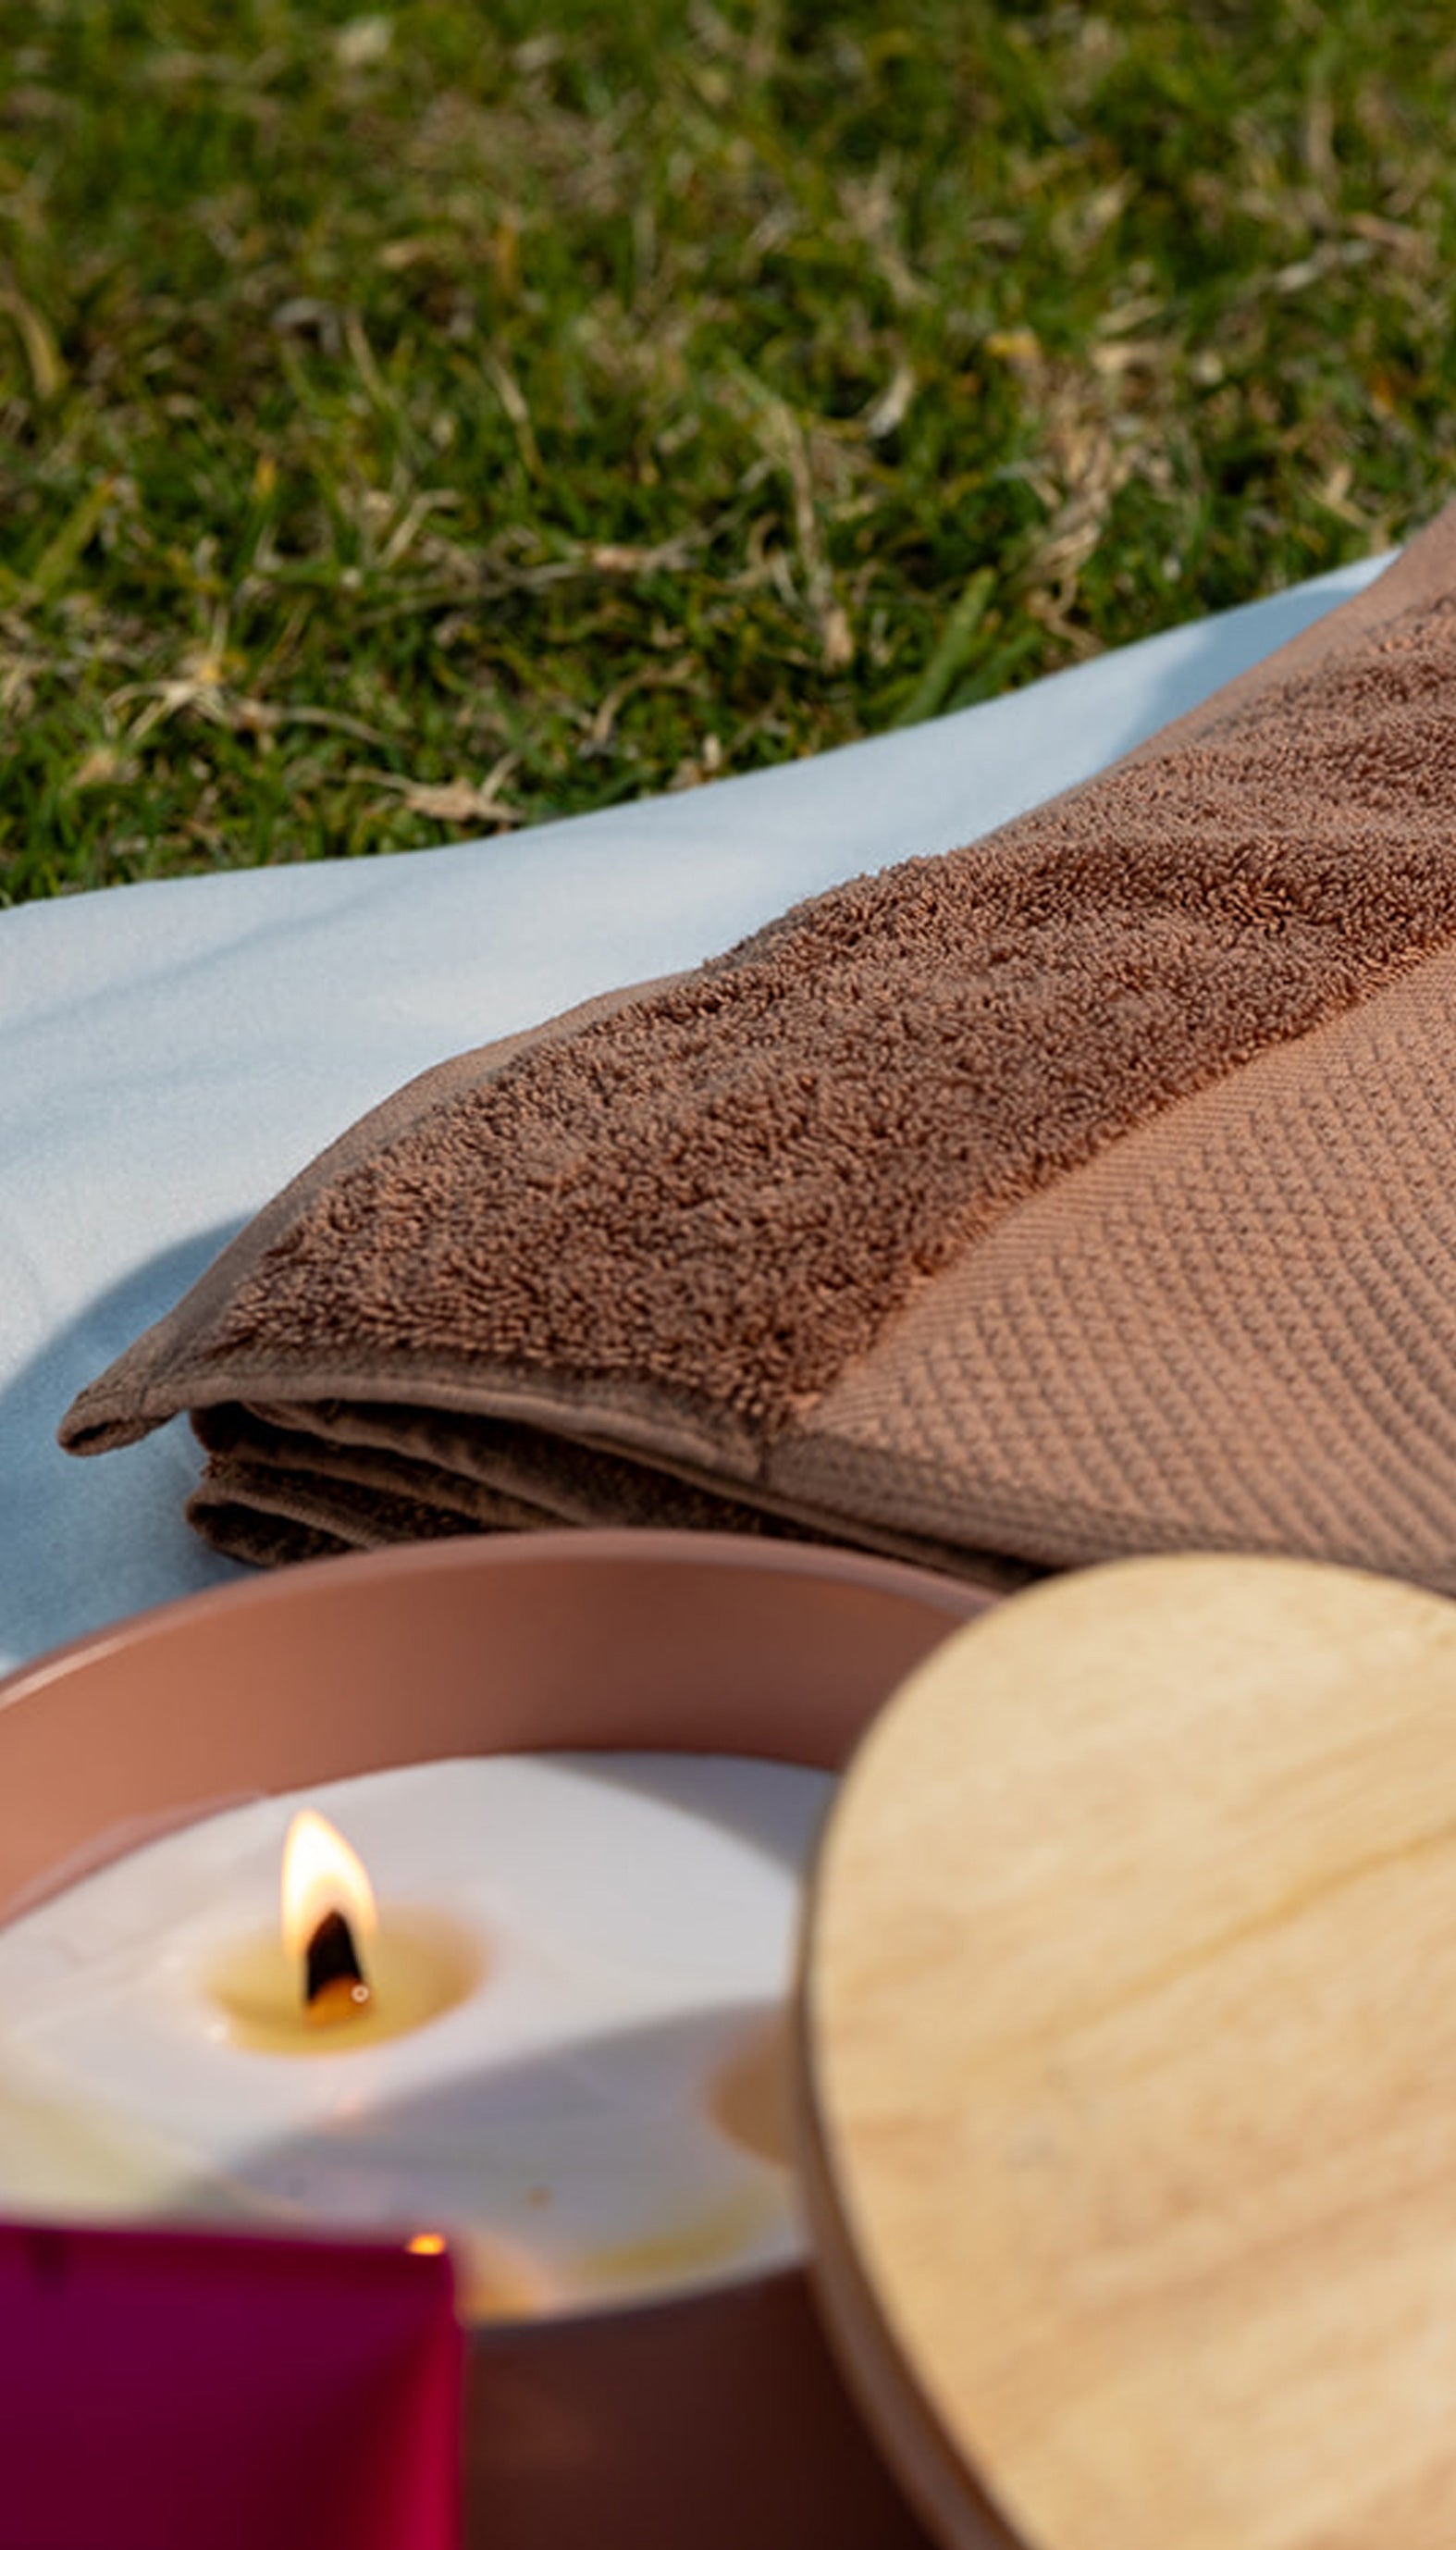 Experience luxurious comfort with Ornamajo towels, enhancing your sunbathing moments with plushness and style.